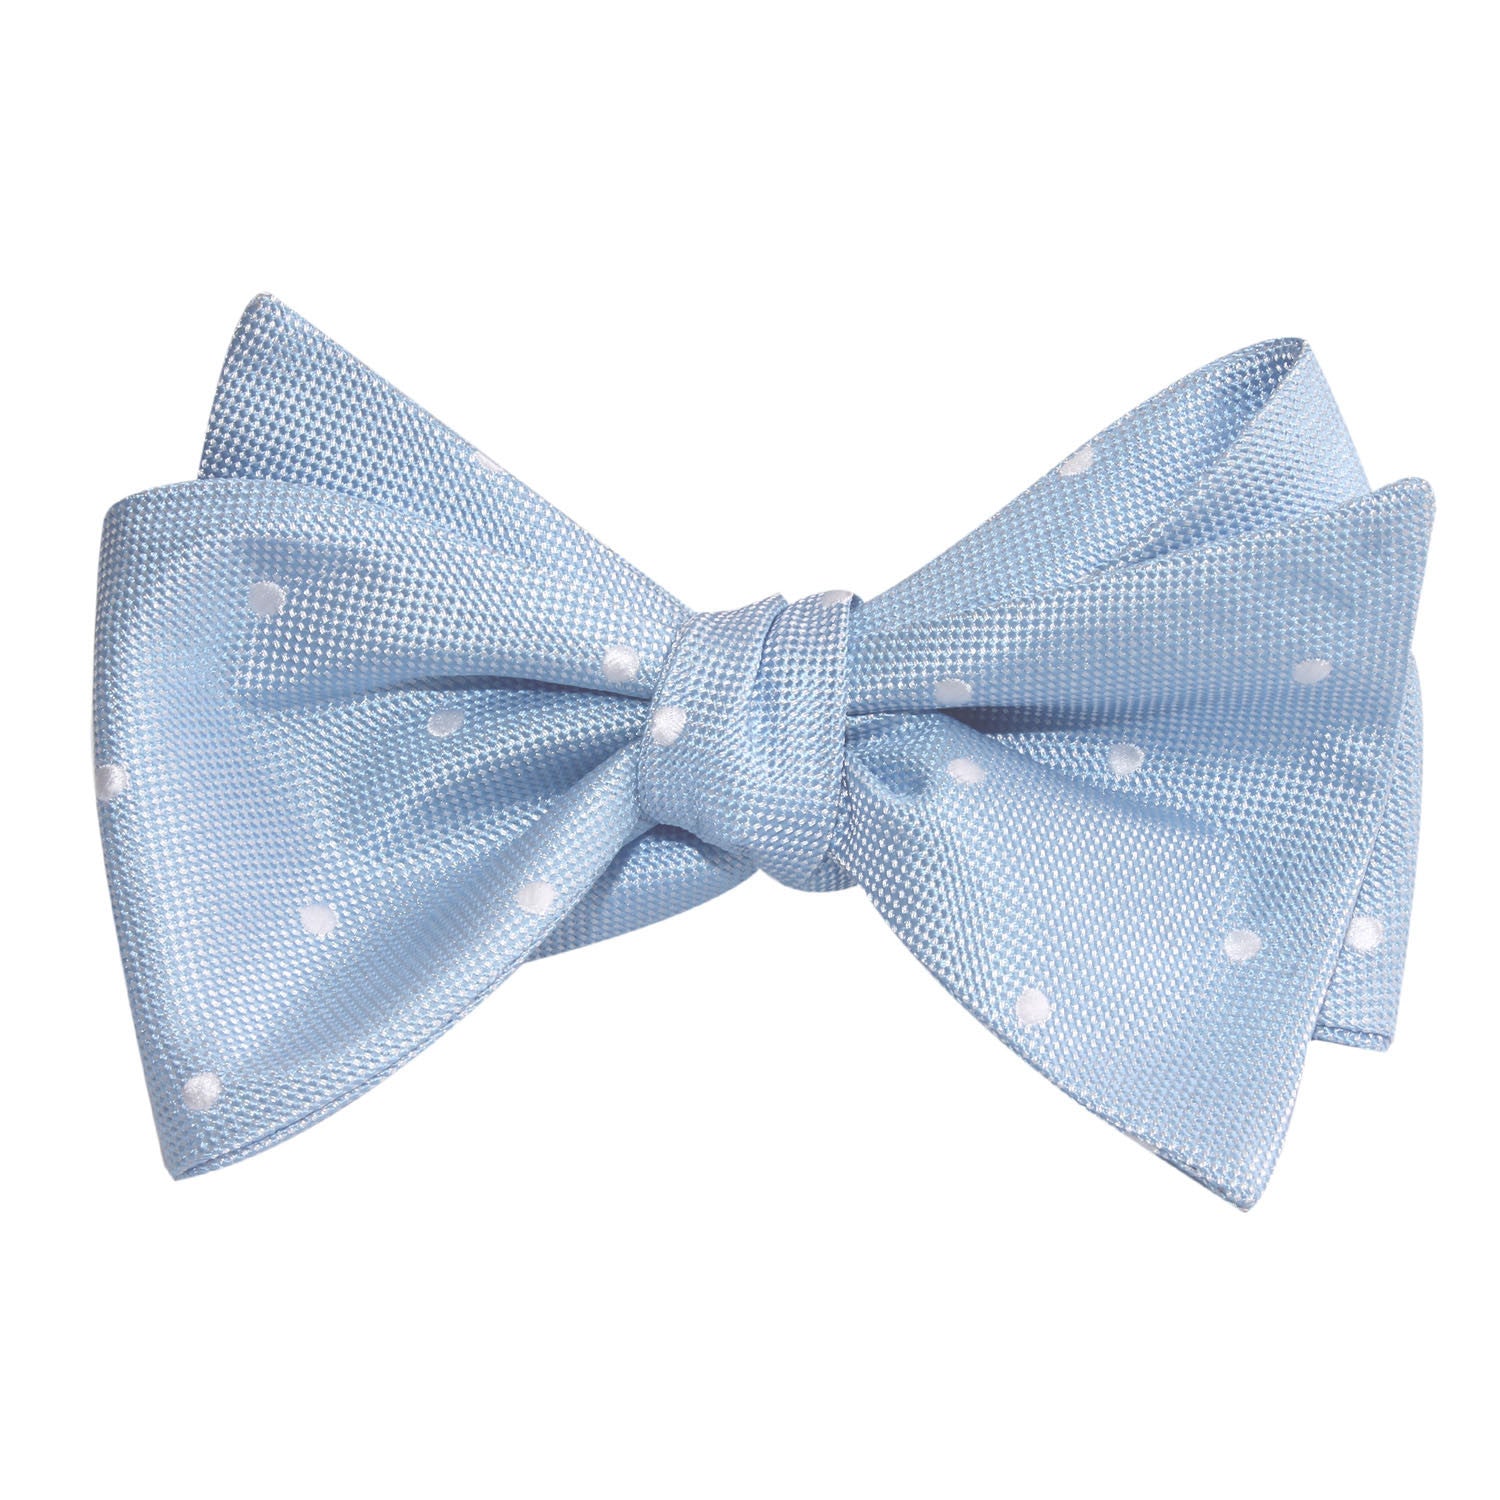 Mint Blue with White Polka Dots Self Tie Bow Tie